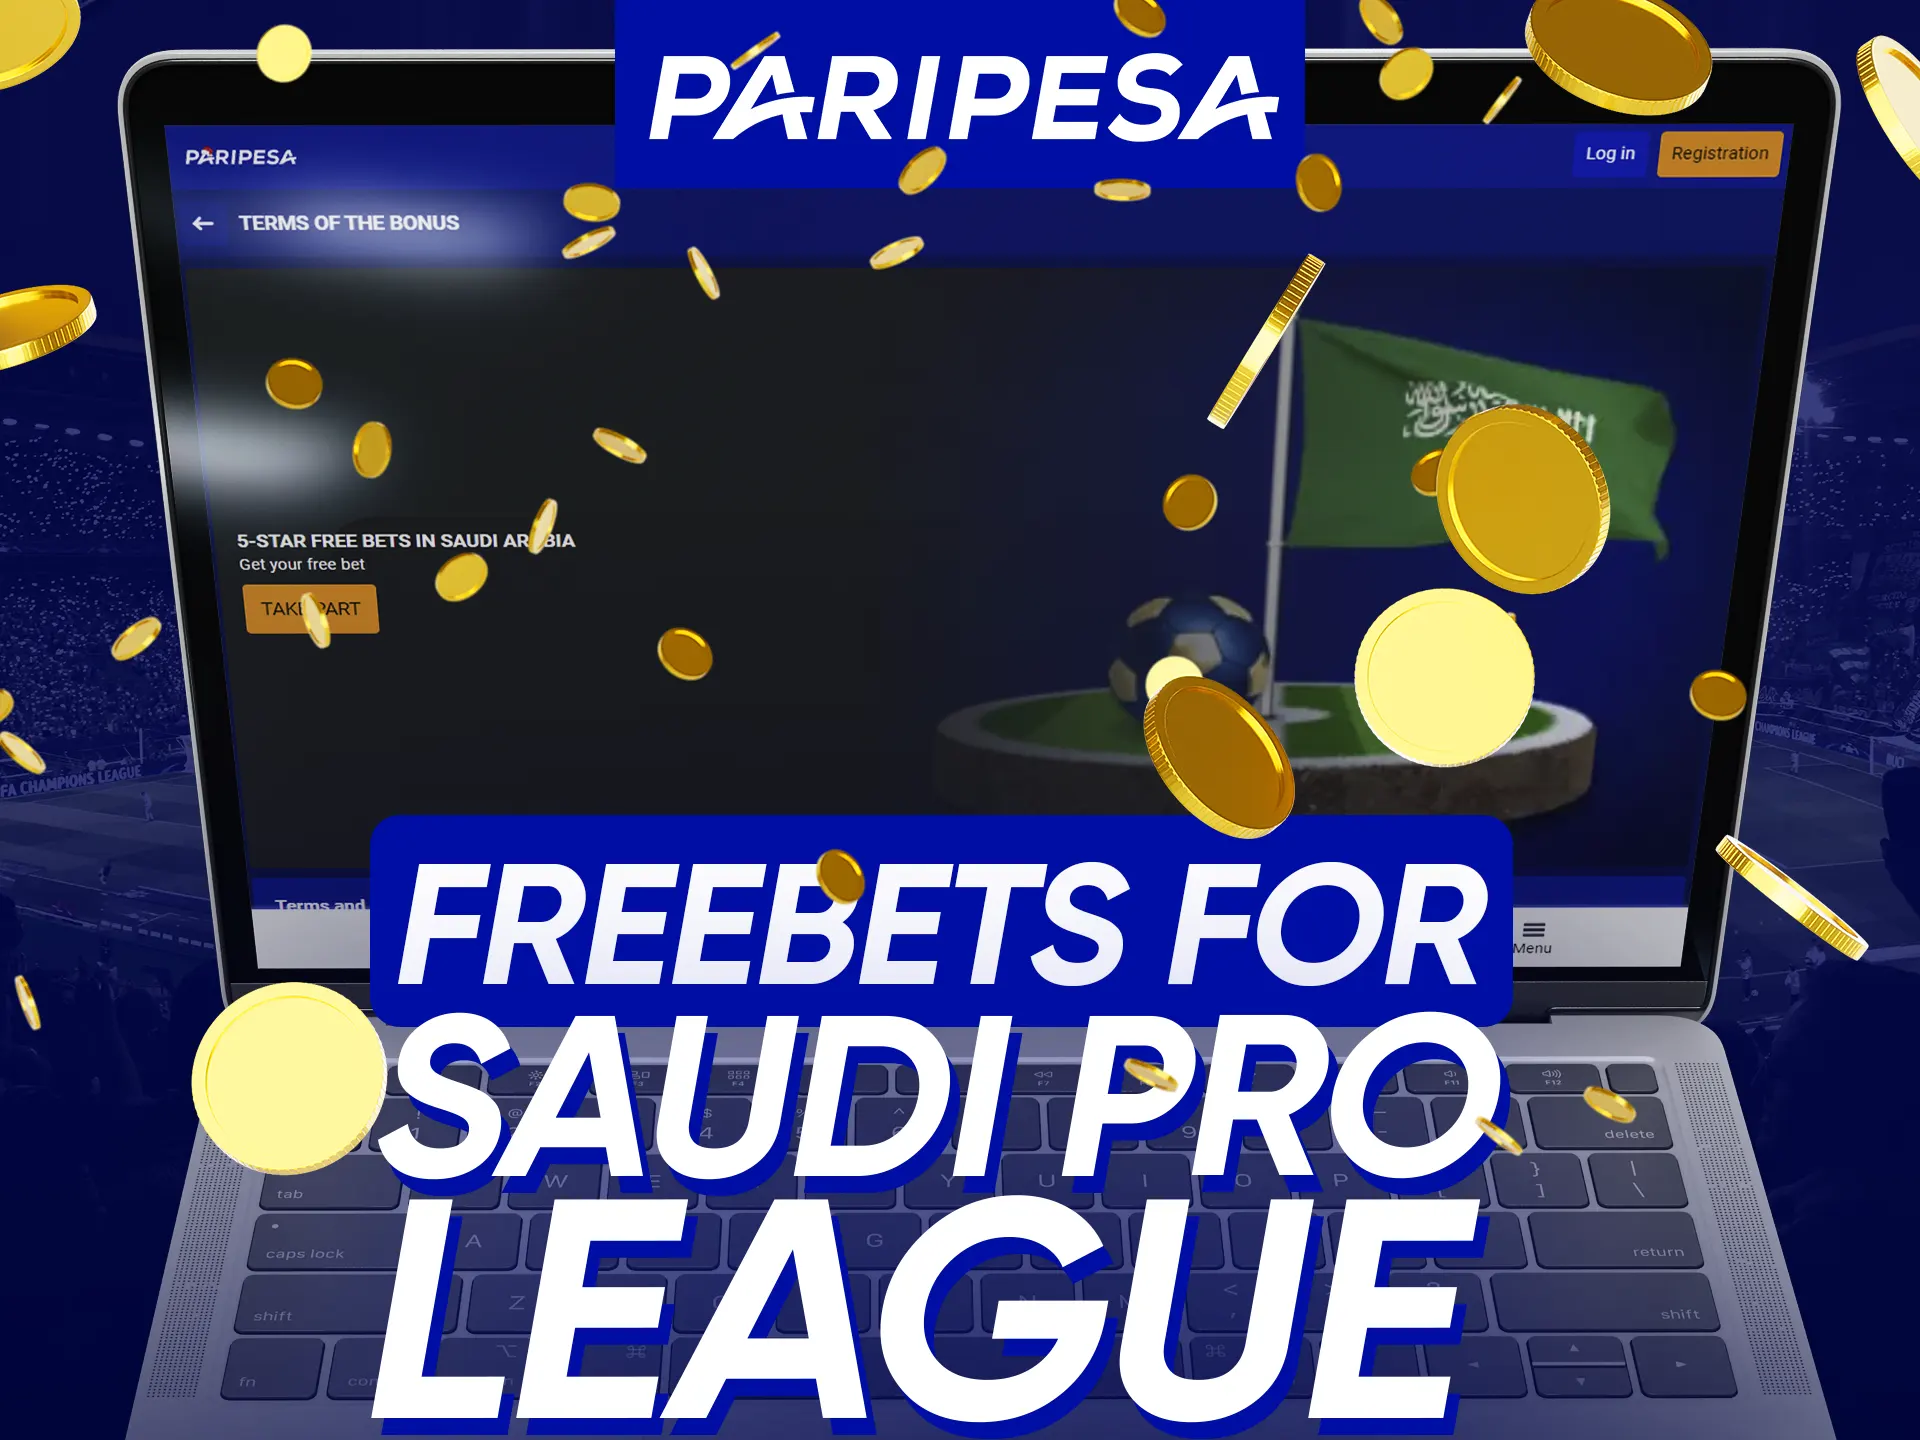 Get freebets for 10 bets on Saudi Pro League at Paripesa.